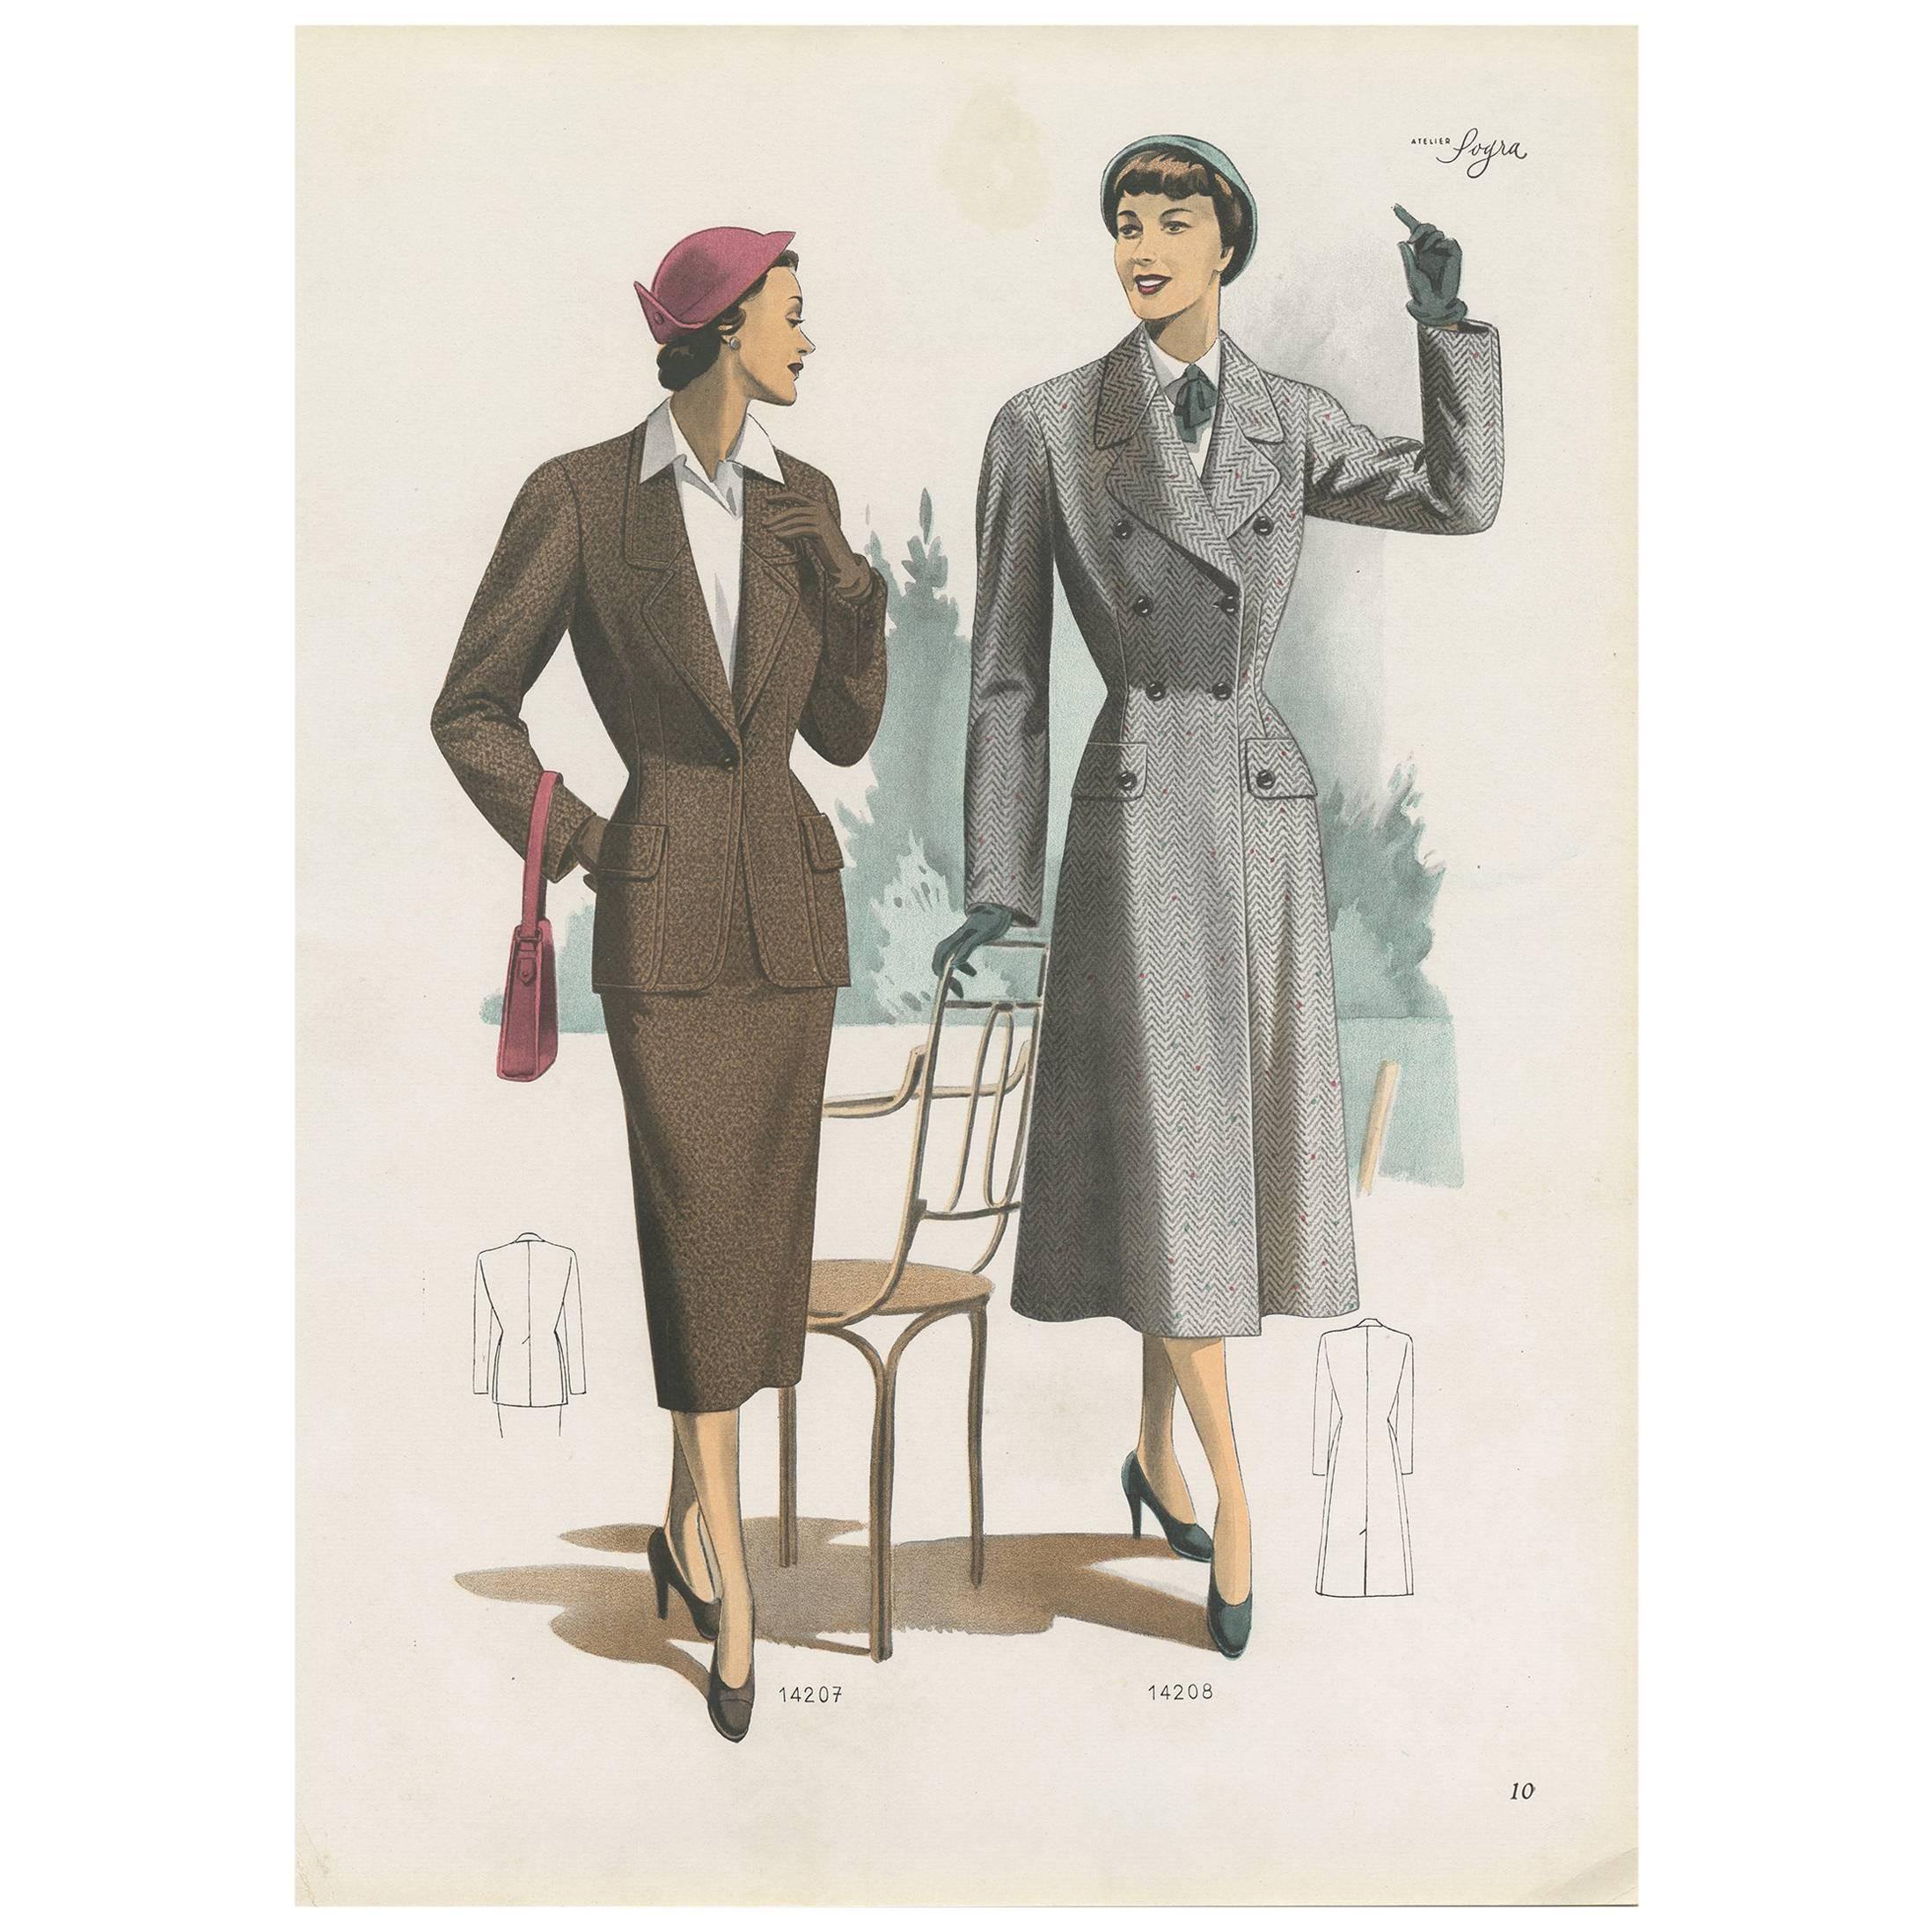 Vintage Fashion Print ‘Pl. 14207’ Published in Ladies Styles, 1951